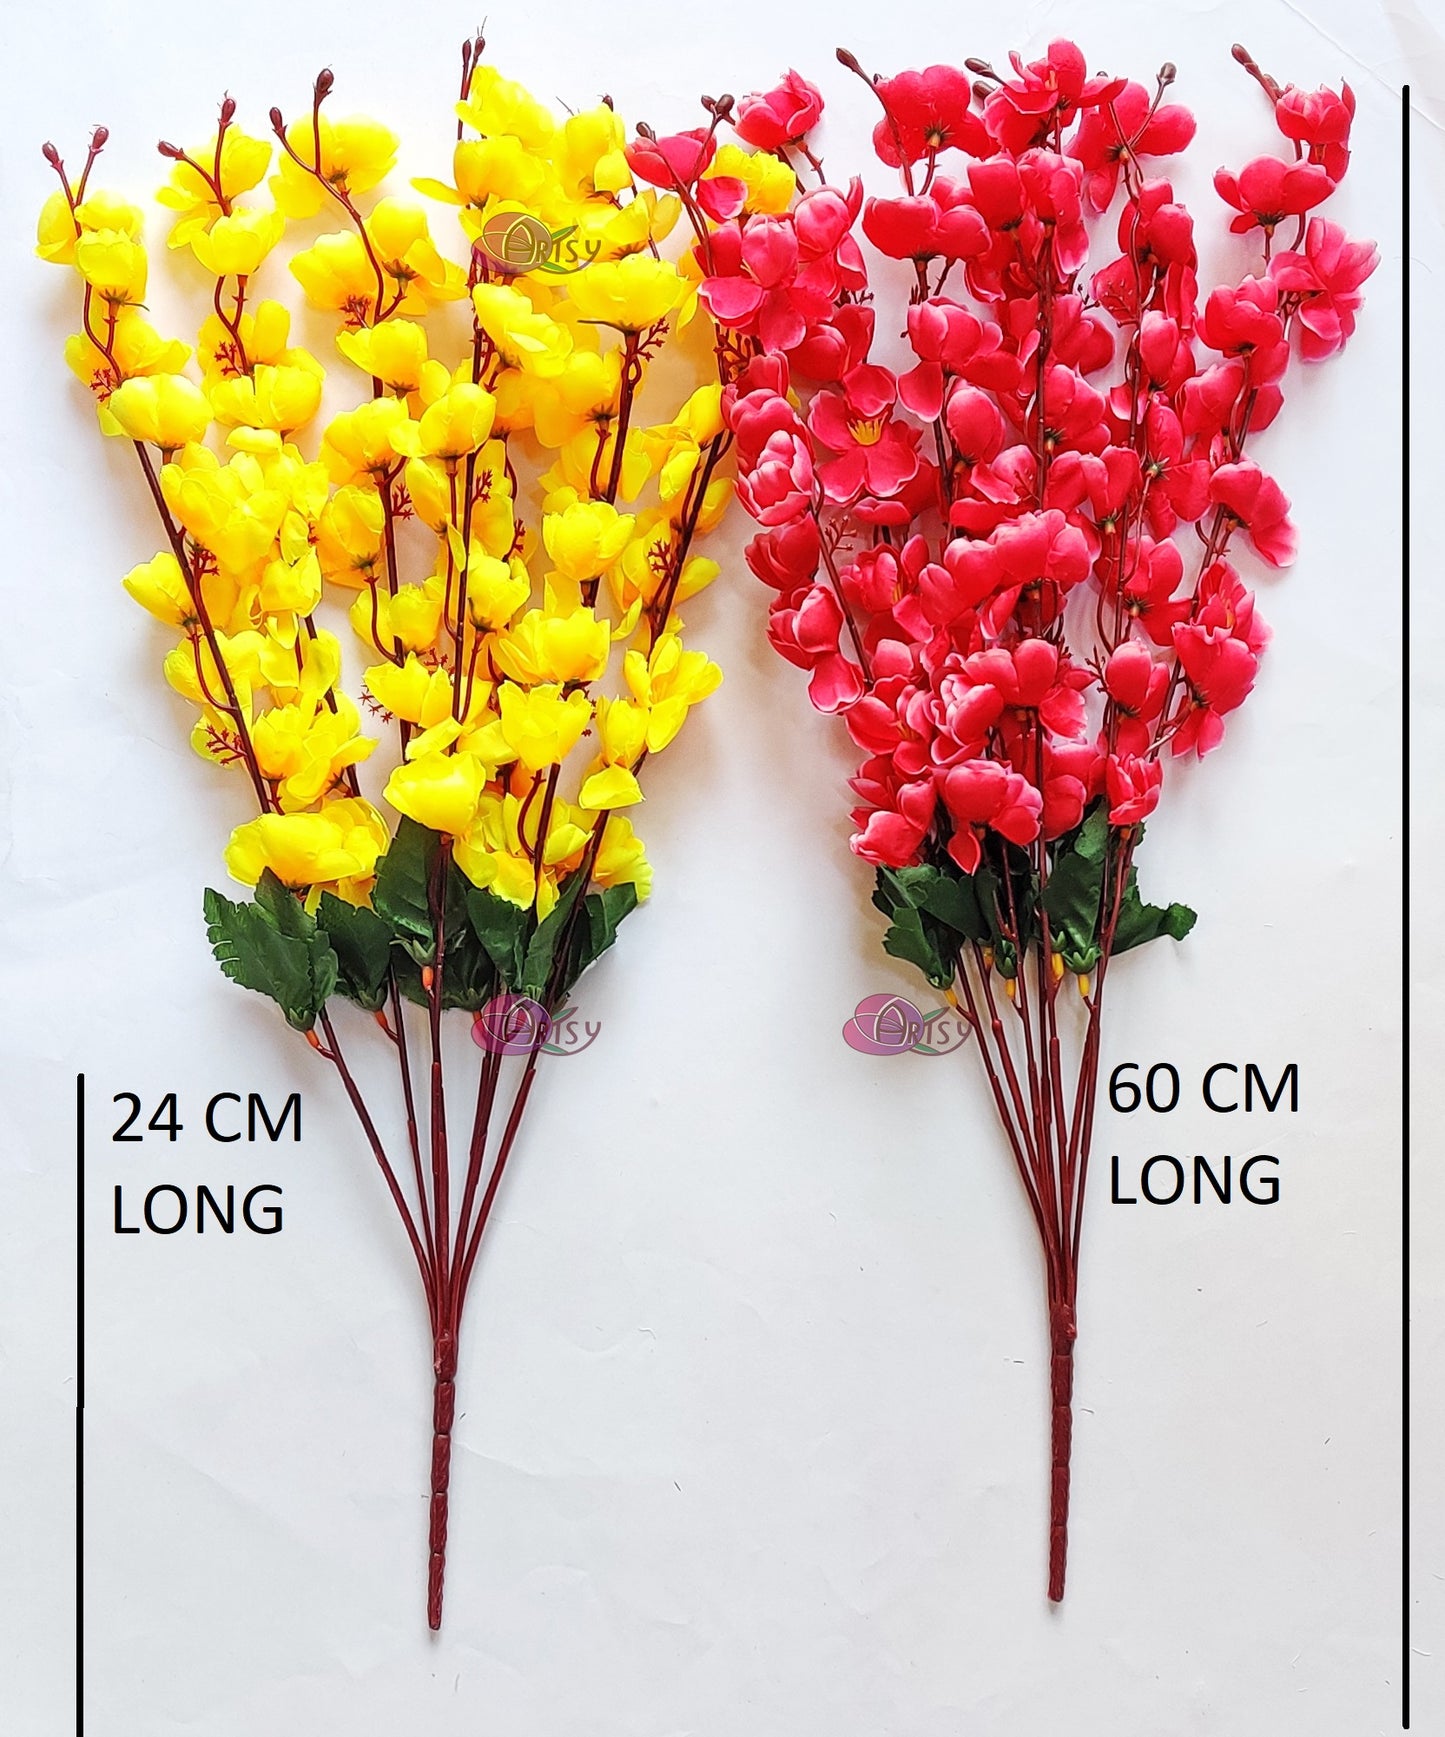 ARTSY® Artificial Flowers For Home Decoration Cherry Blossom Flower Bunch For Vase , Office Decor, Without VASE, Combo (Yellow Pink , Pack of 2 Pieces)